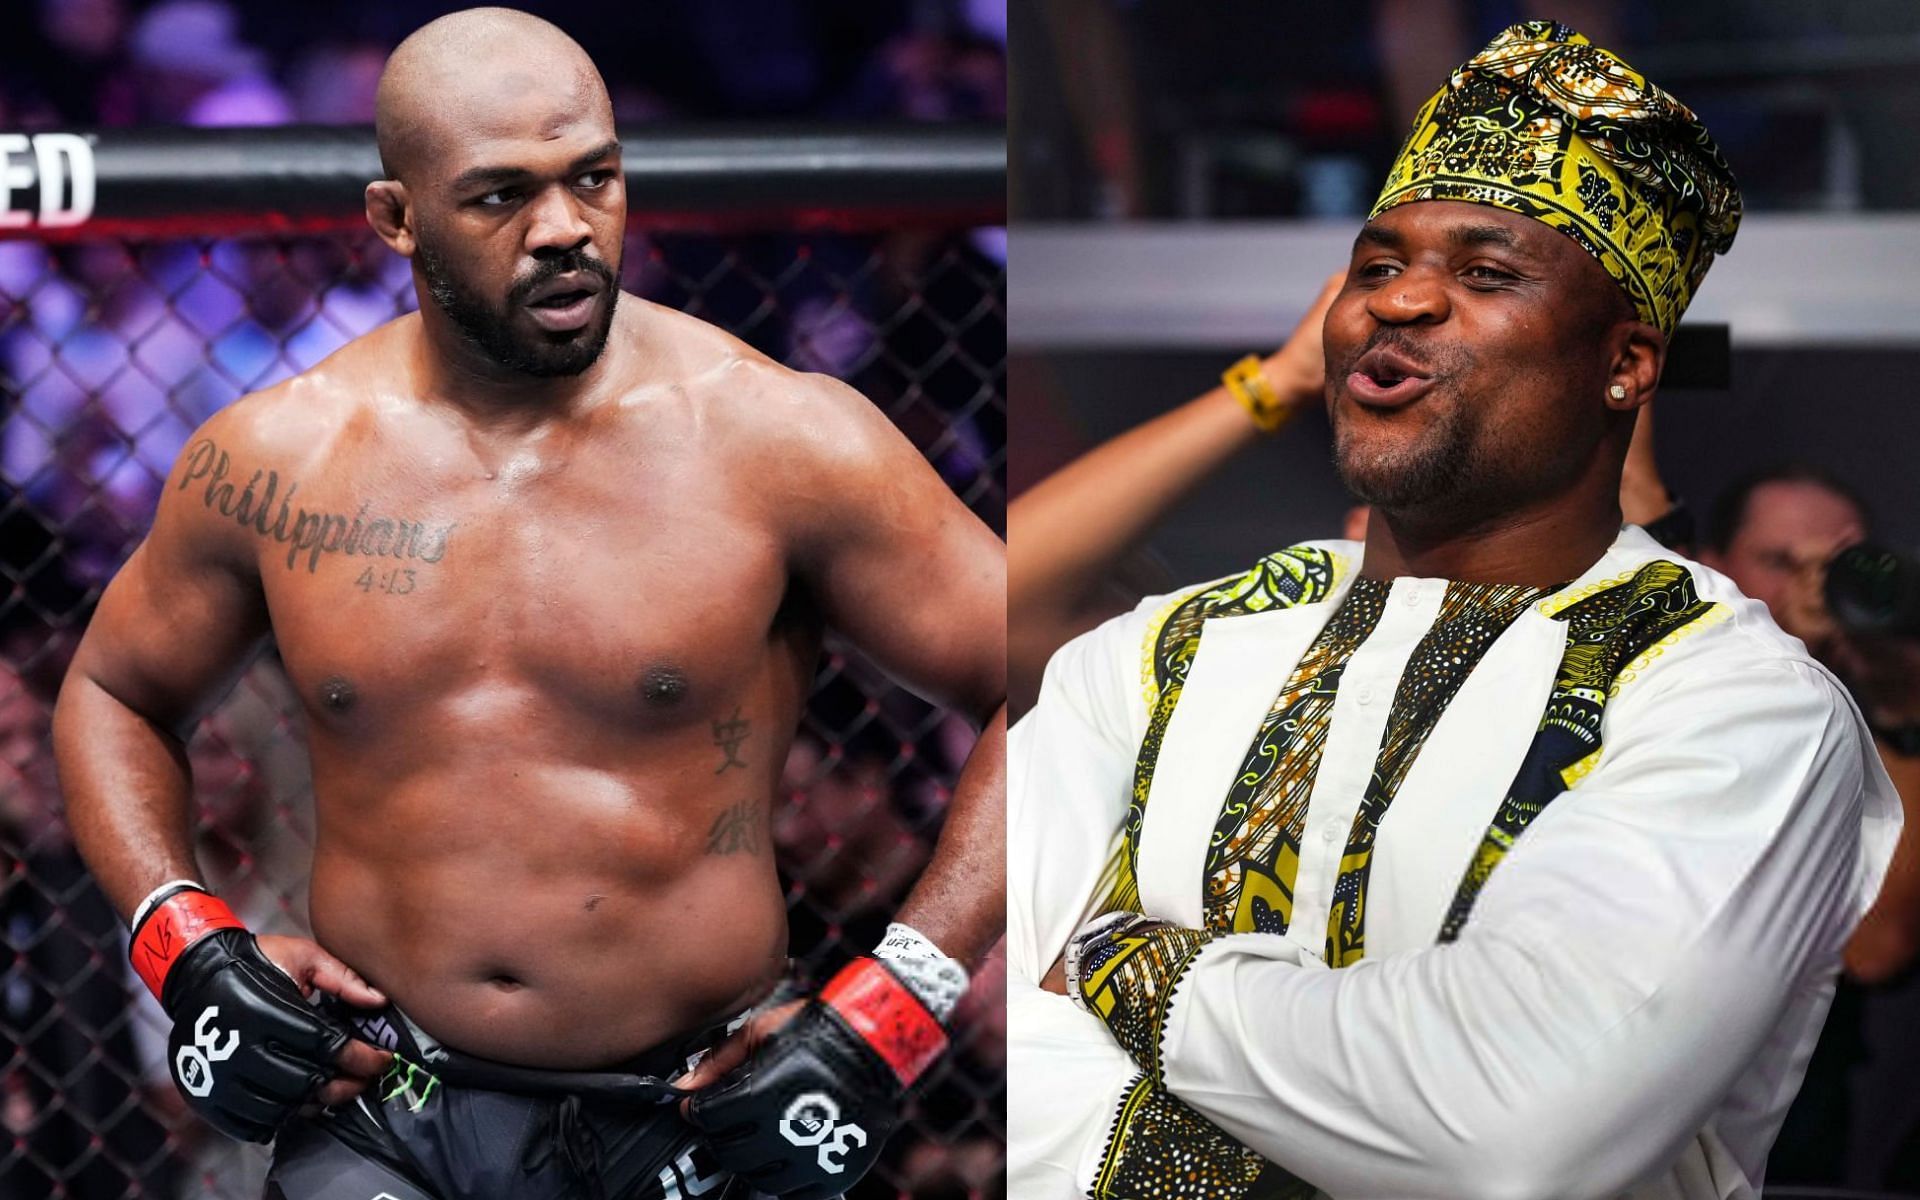 Jon Jones (left) and Francis Ngannou (right) [Images Courtesy: @GettyImages]